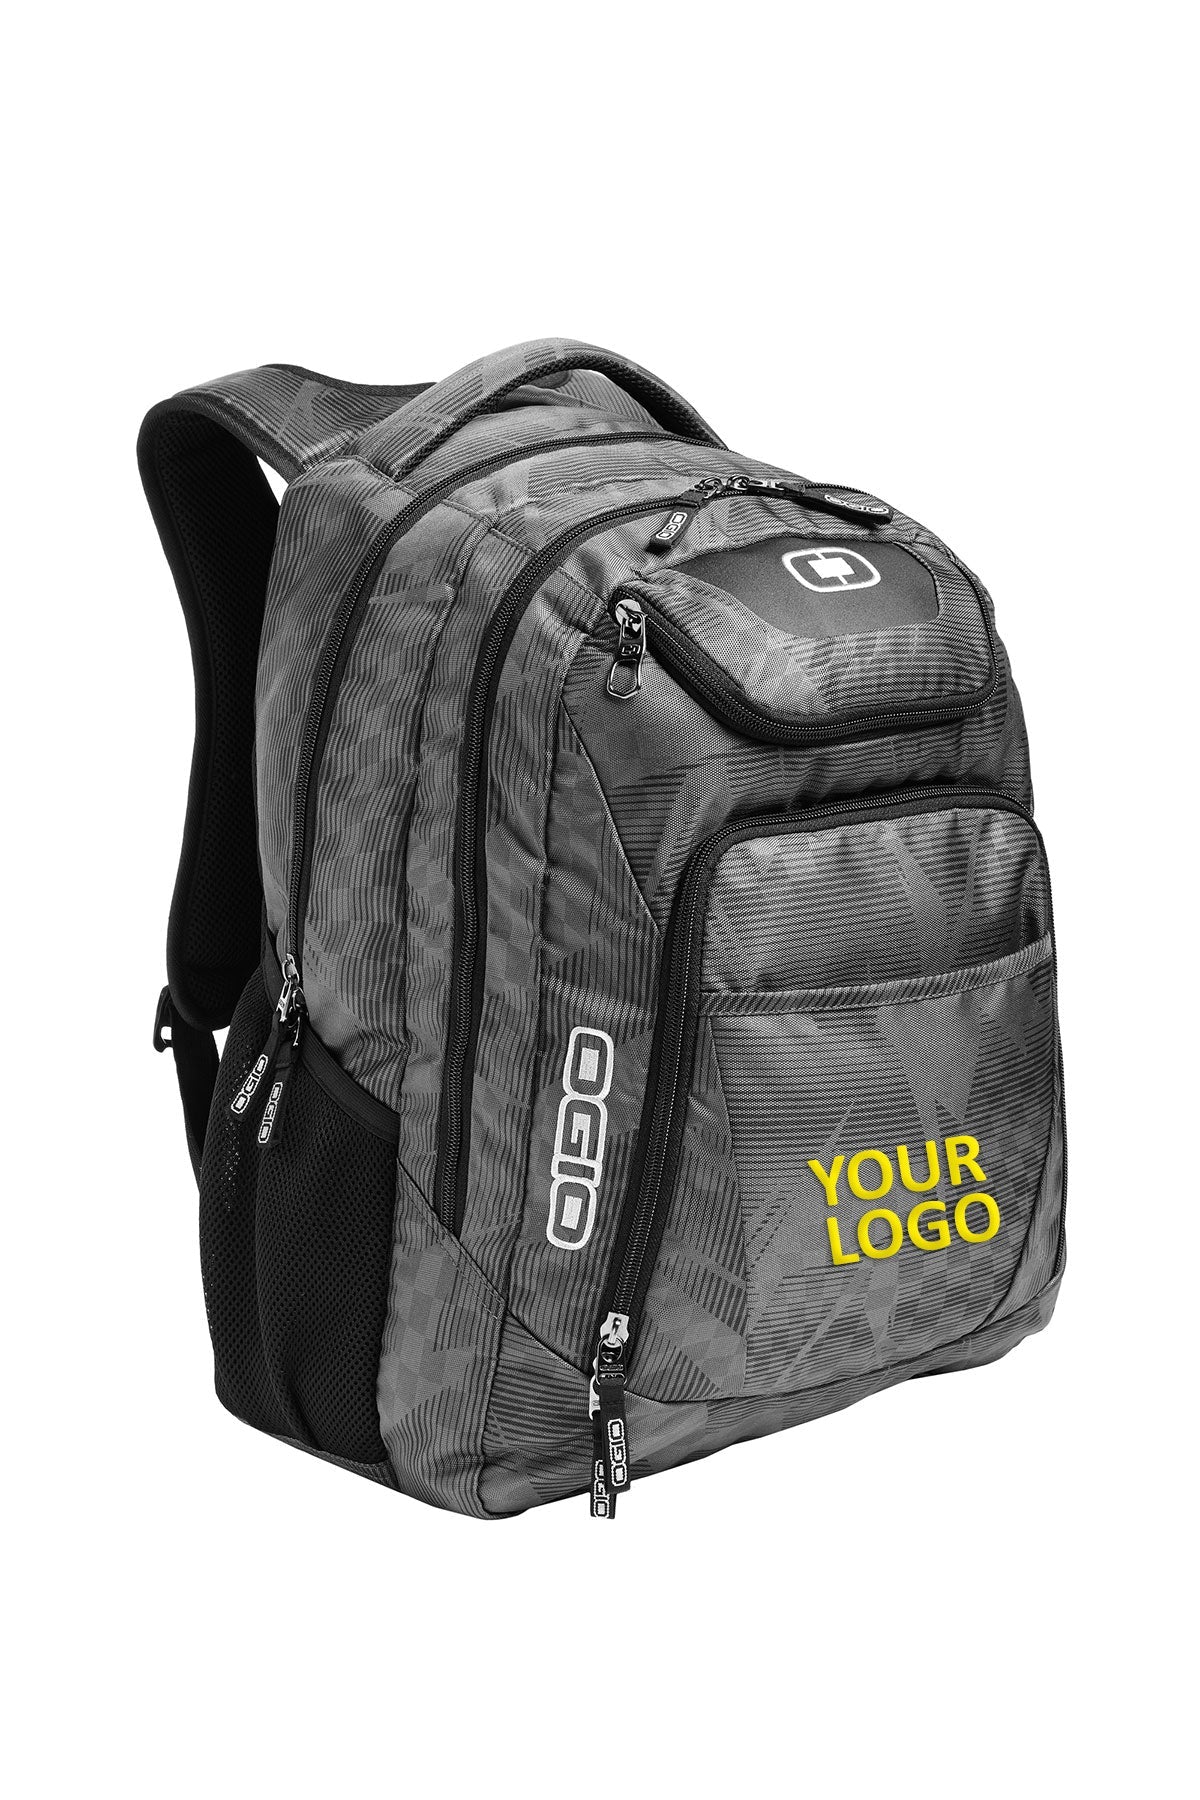 ogio excelsior pack 411069 race day silver